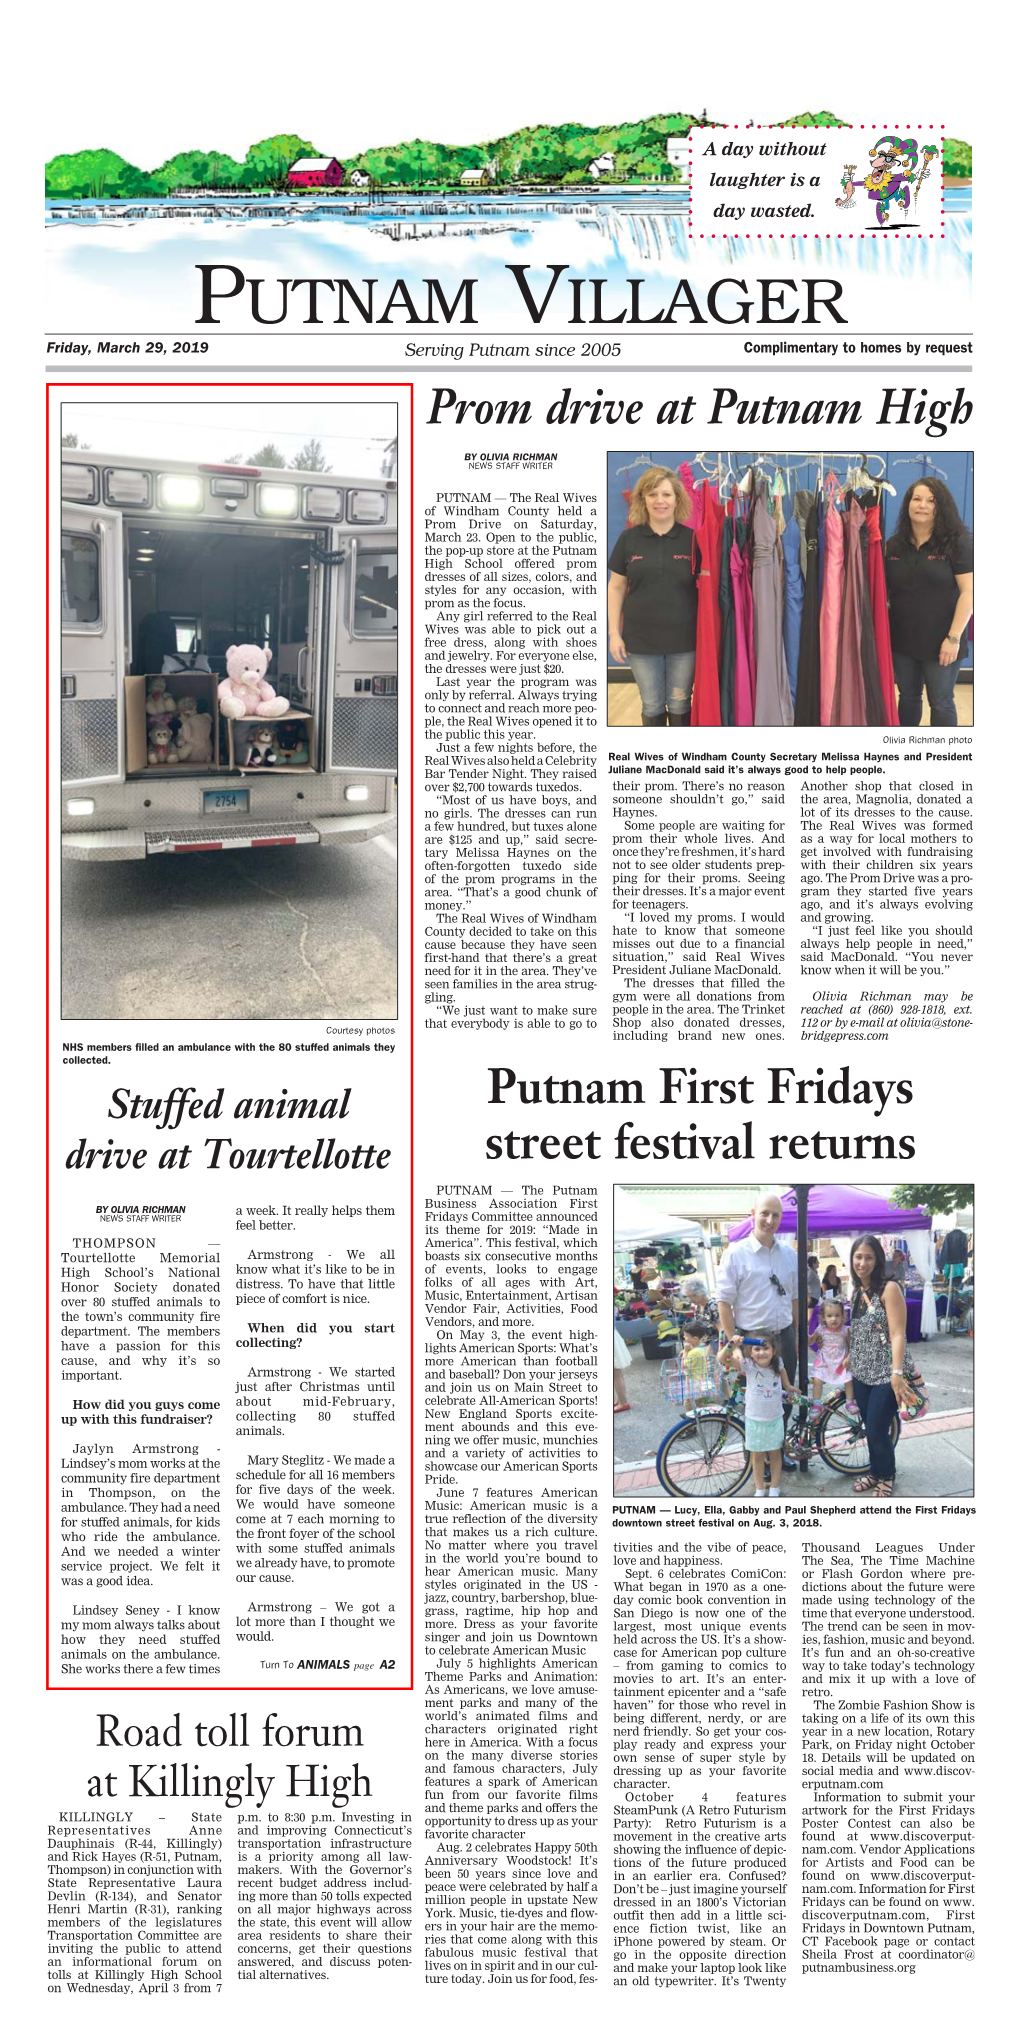 Putnam Villager Friday, March 29, 2019 Serving Putnam Since 2005 Complimentary to Homes by Request Prom Drive at Putnam High